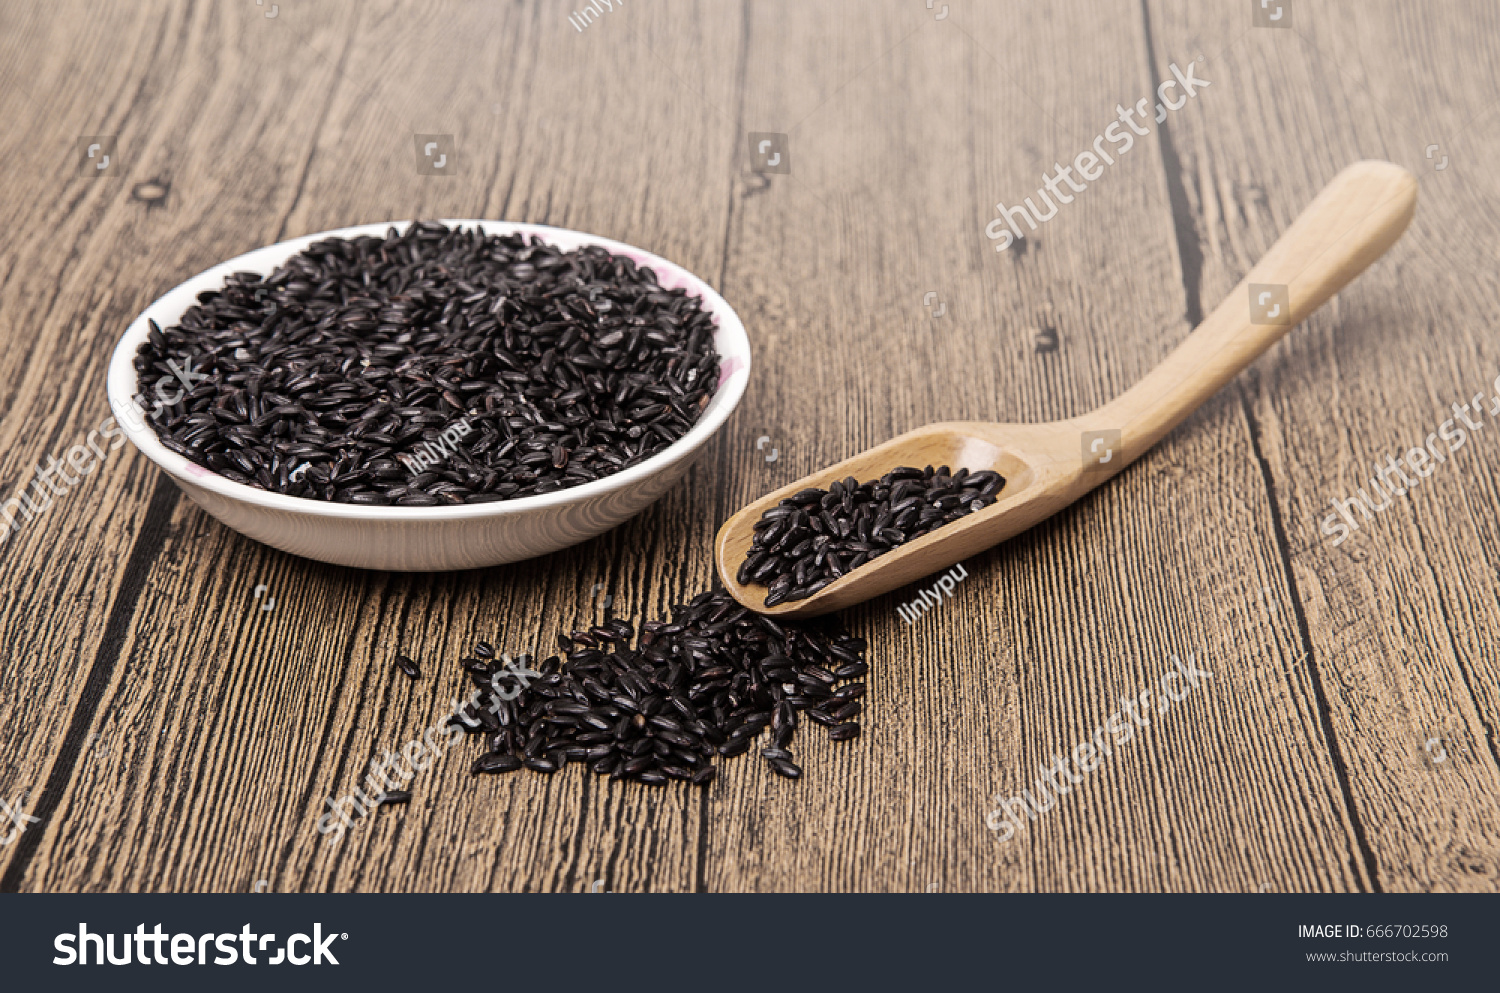 Black rice is on the table #666702598